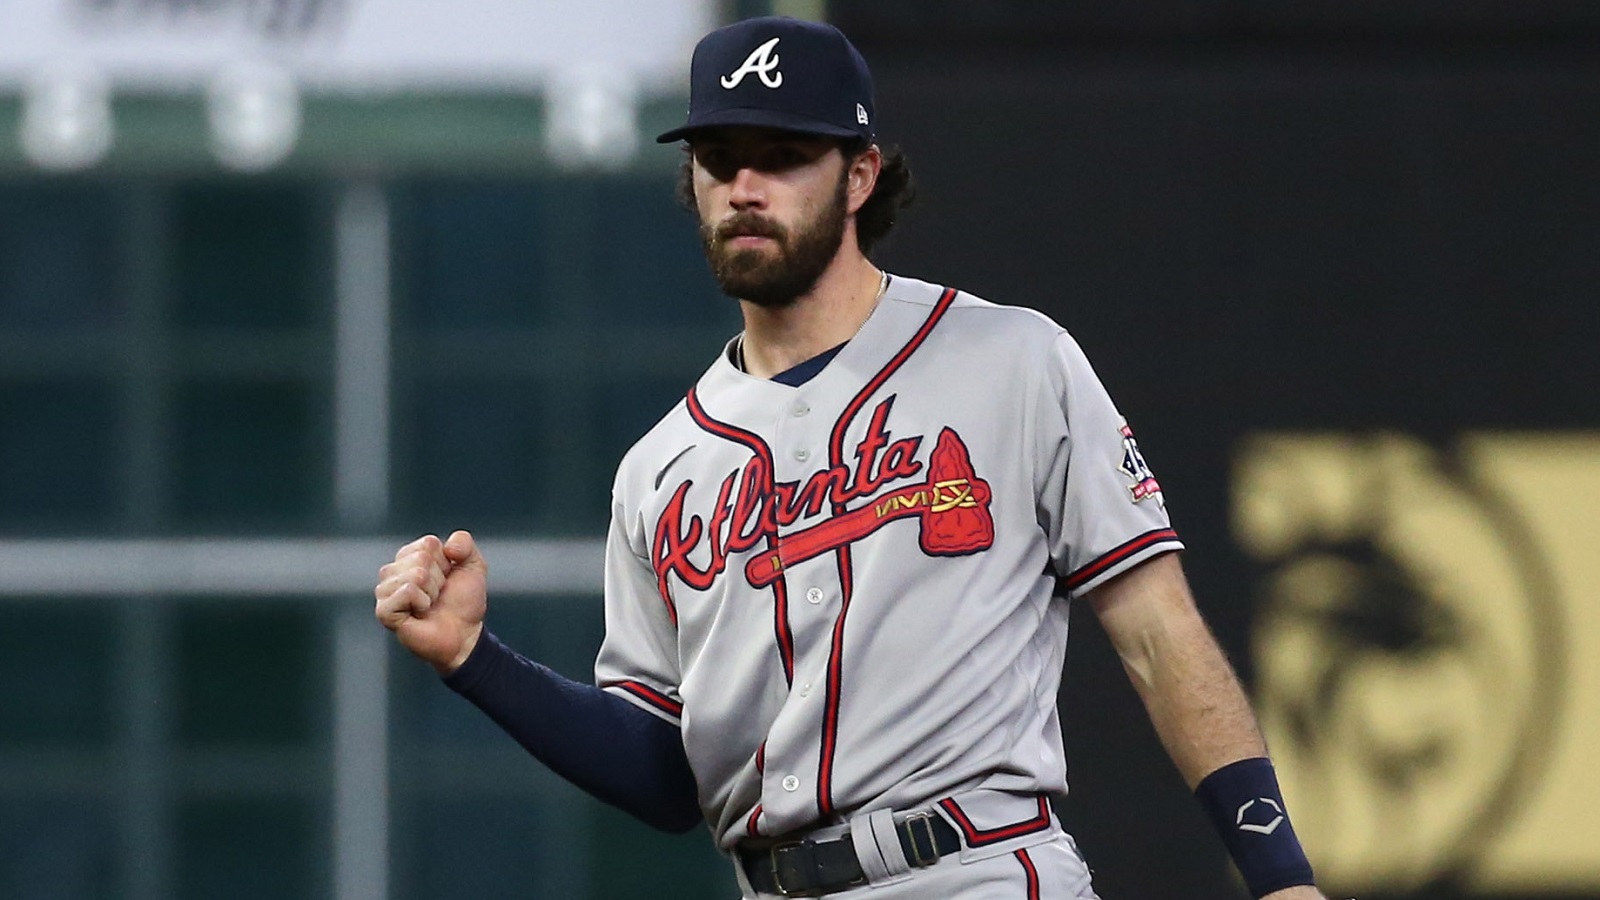 Dansby Swanson bids farewell to Braves with social media message